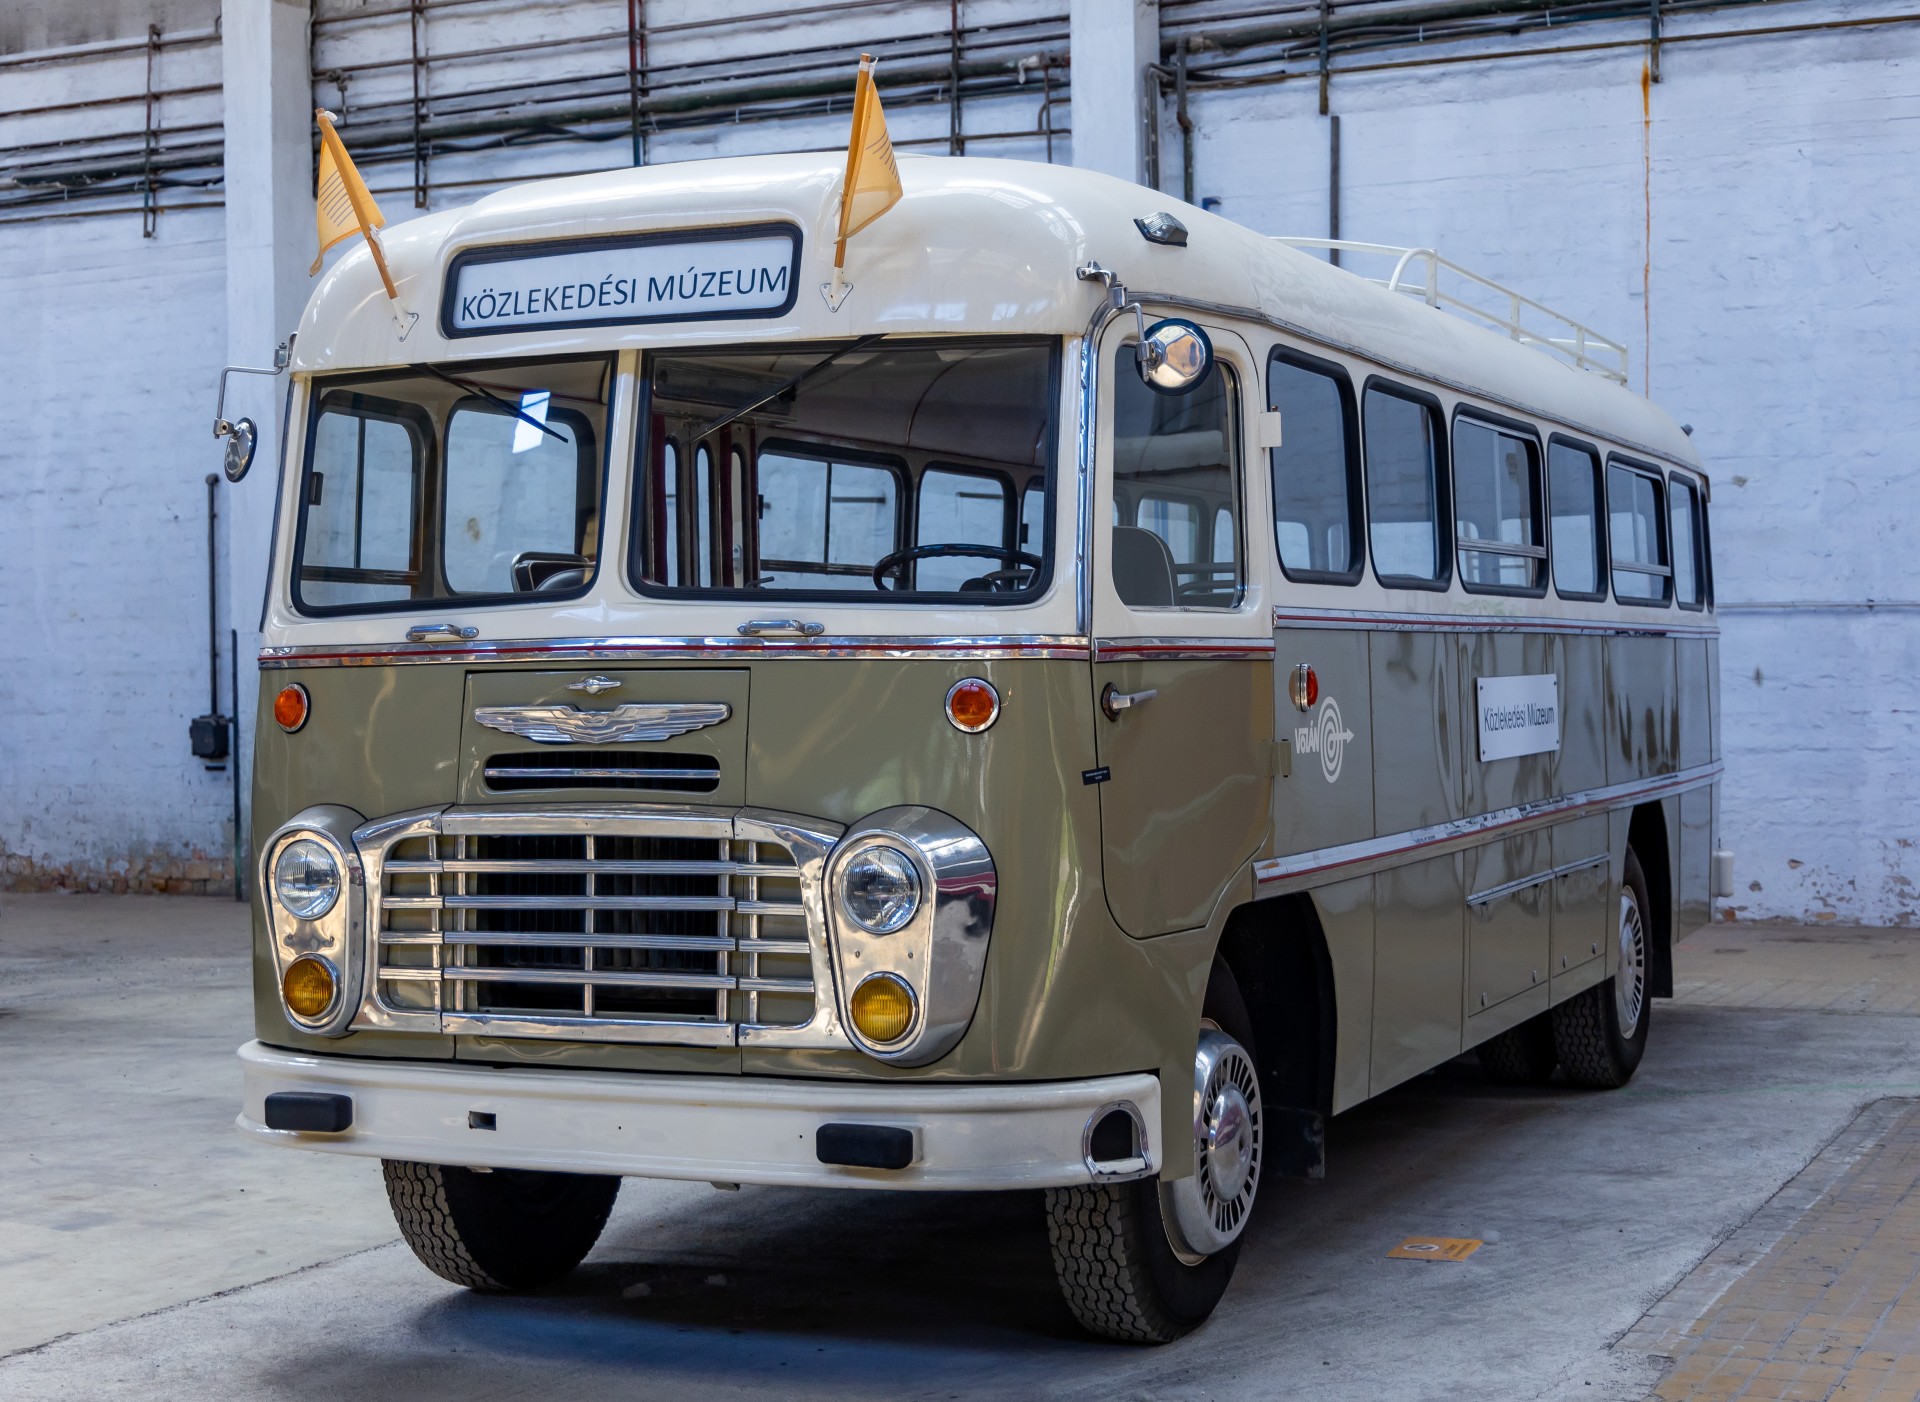 Special Ikarus buses can be seen at the Transport Museum during the weekend